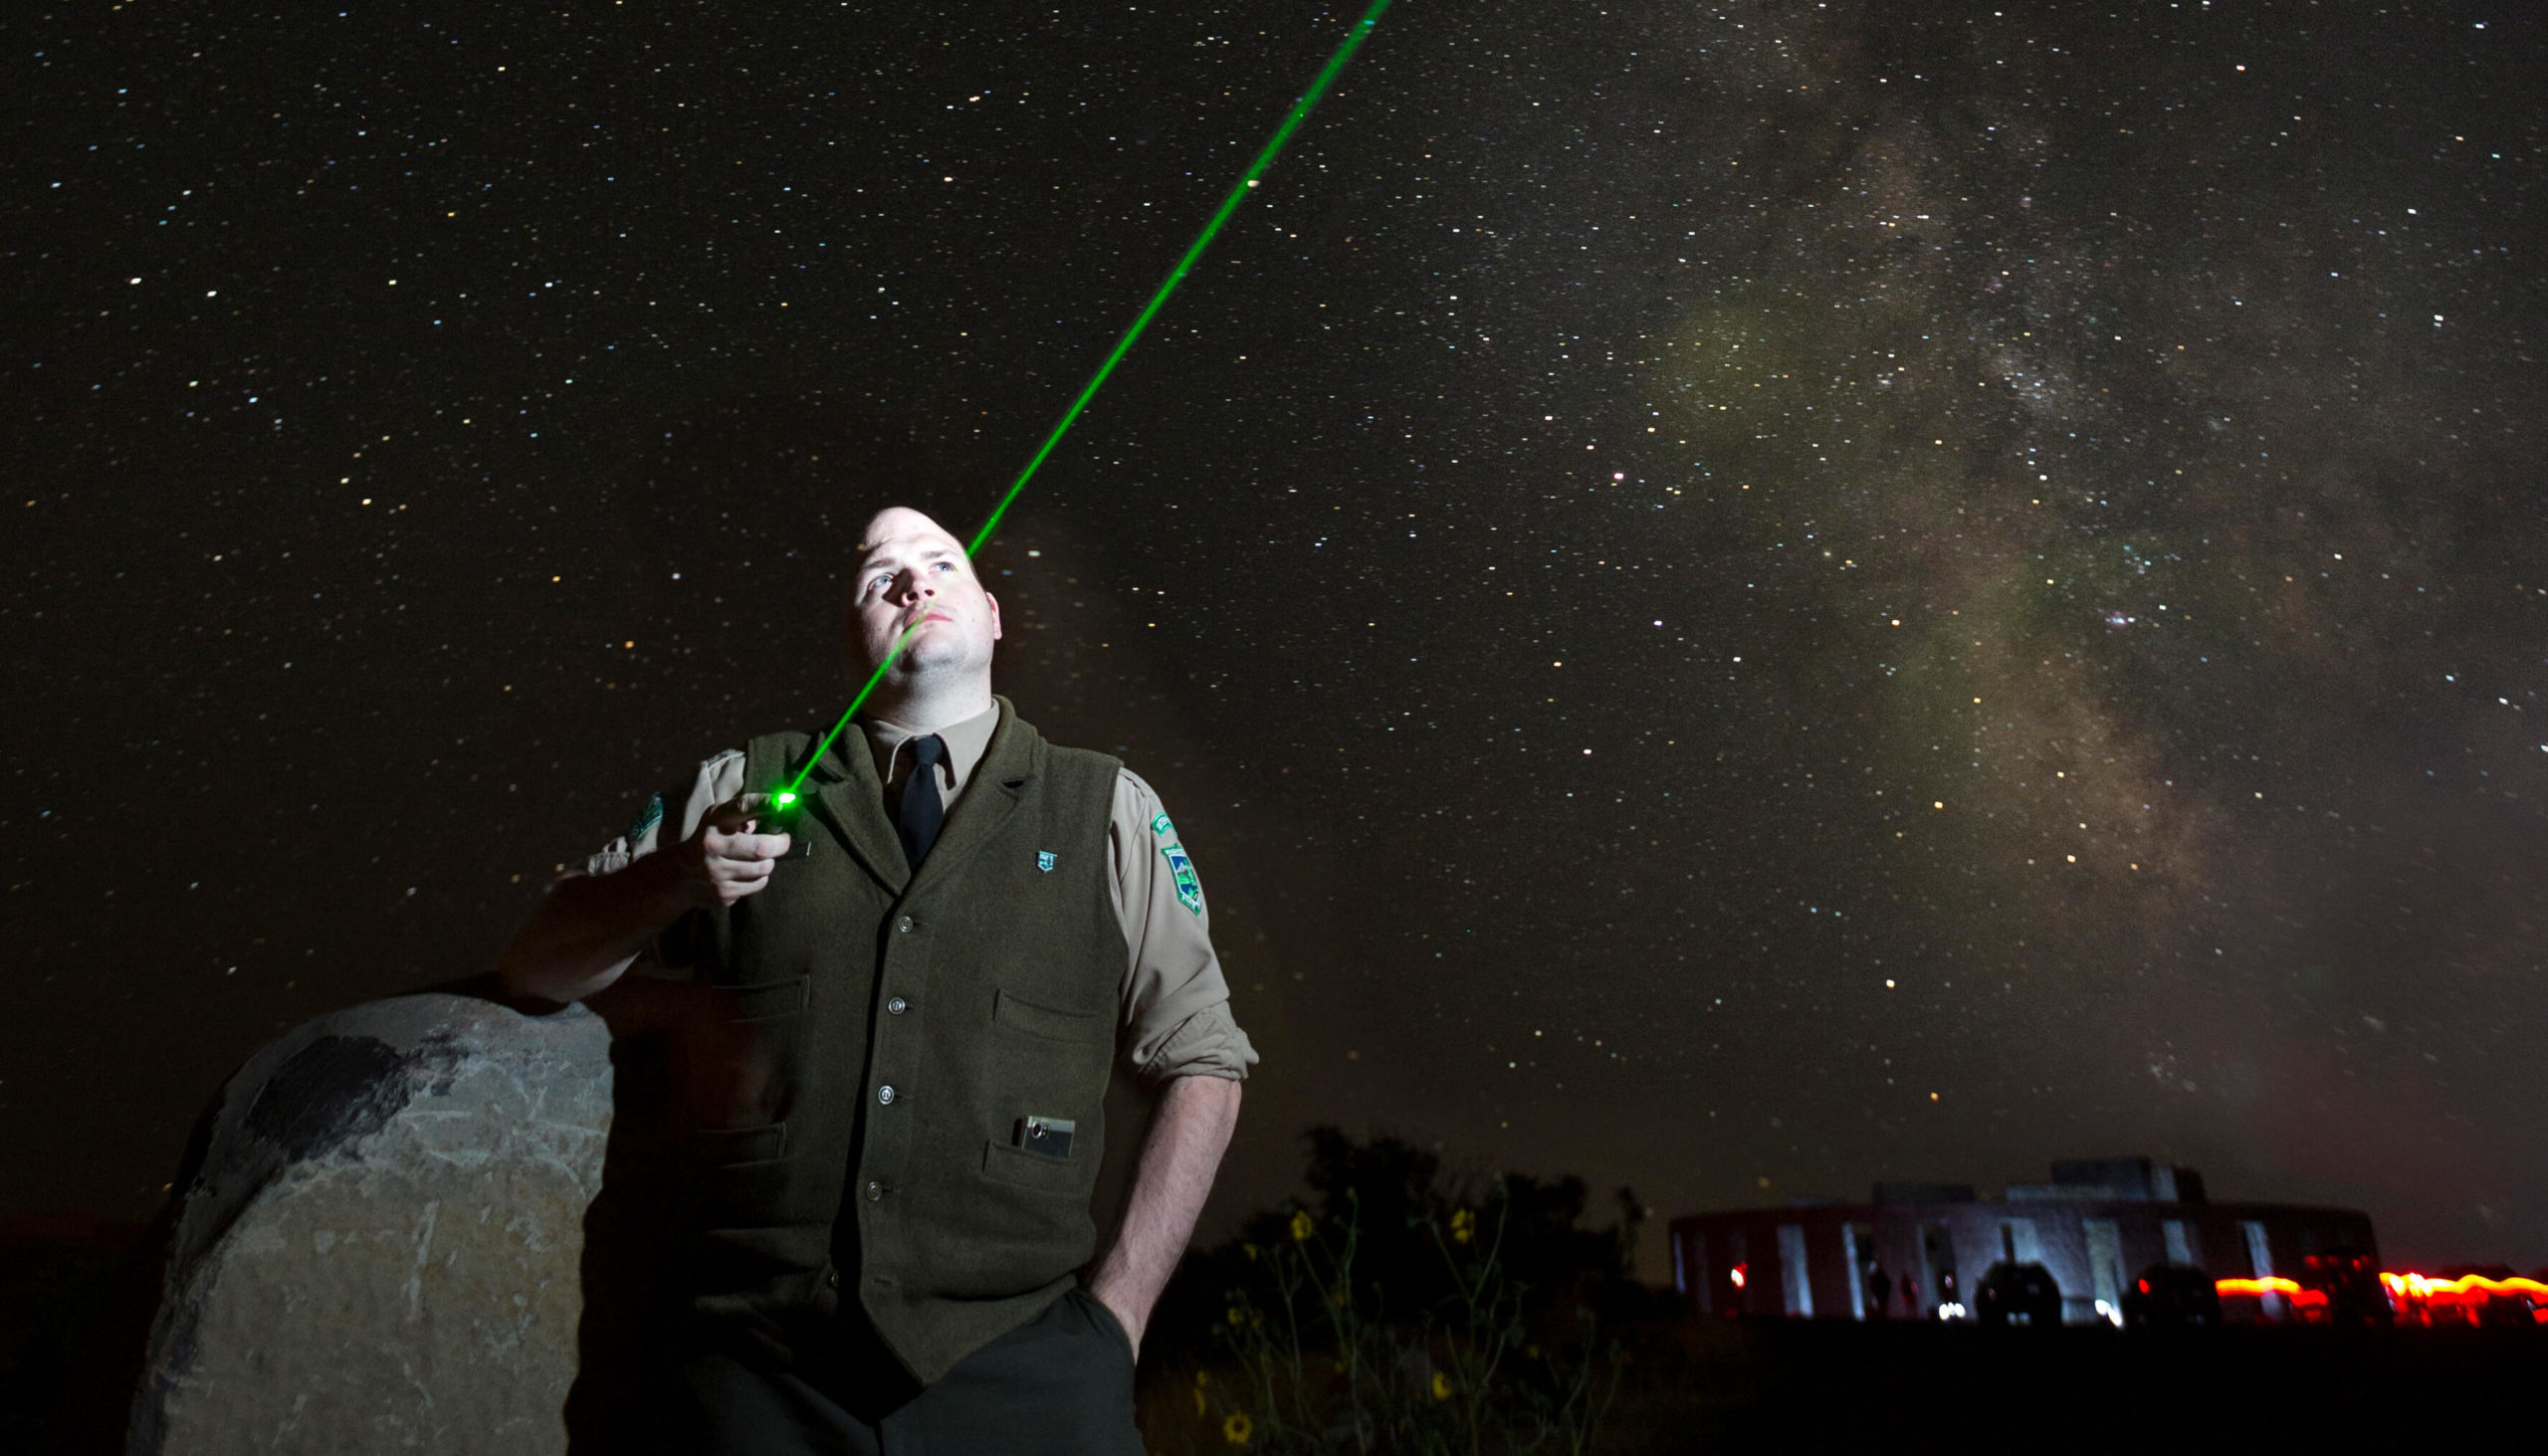 goldendale observatory troy carpenter laser milky way photo by tegra stone nuess